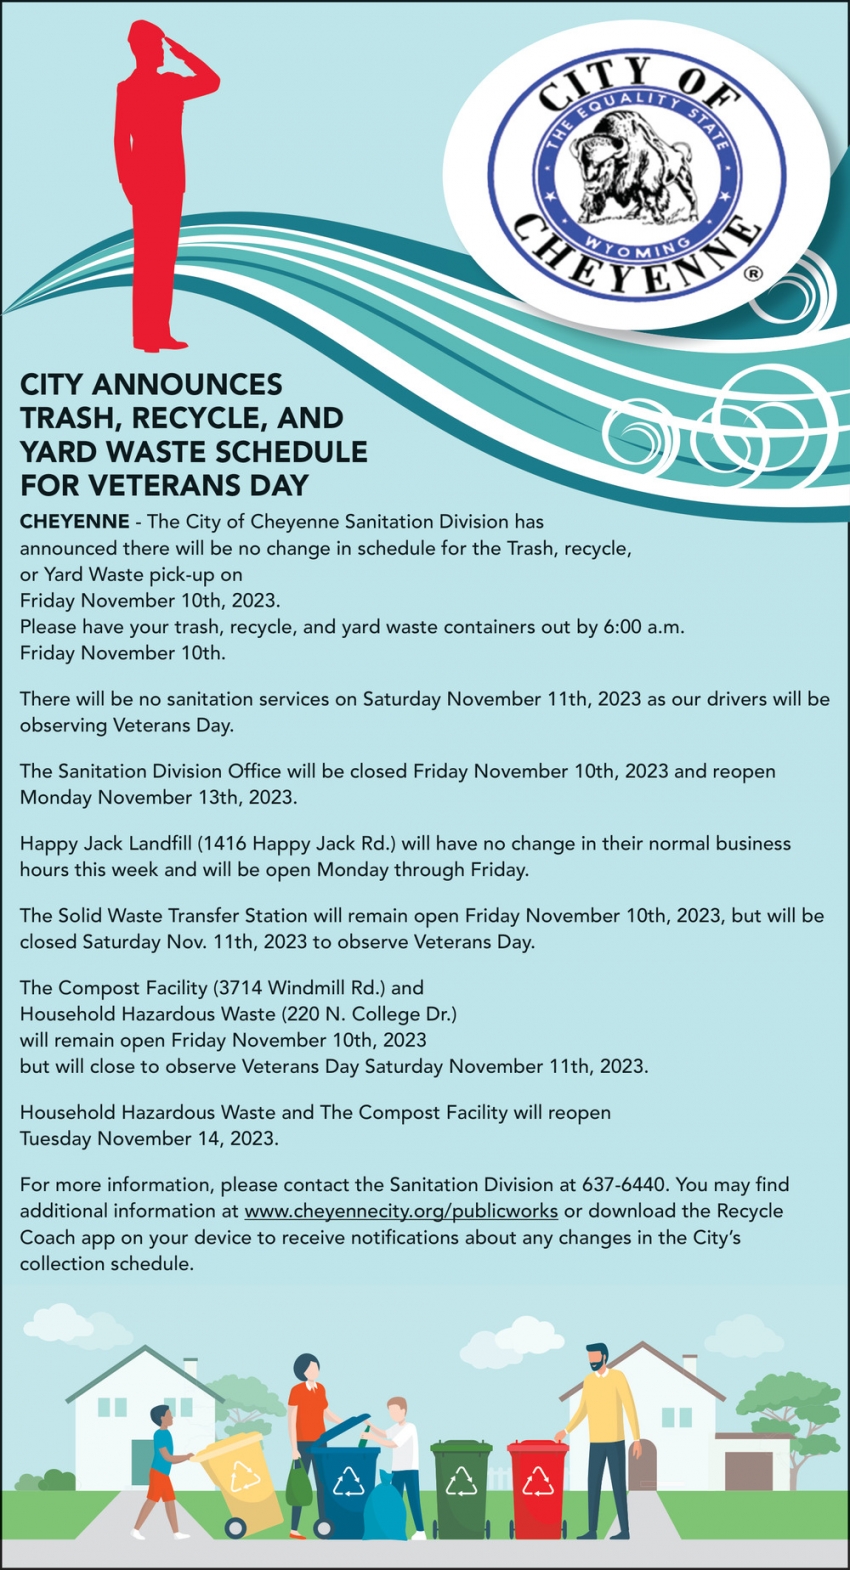 City Announces Trash, Recycle, and Yard Waste Schedule for Veterans Day